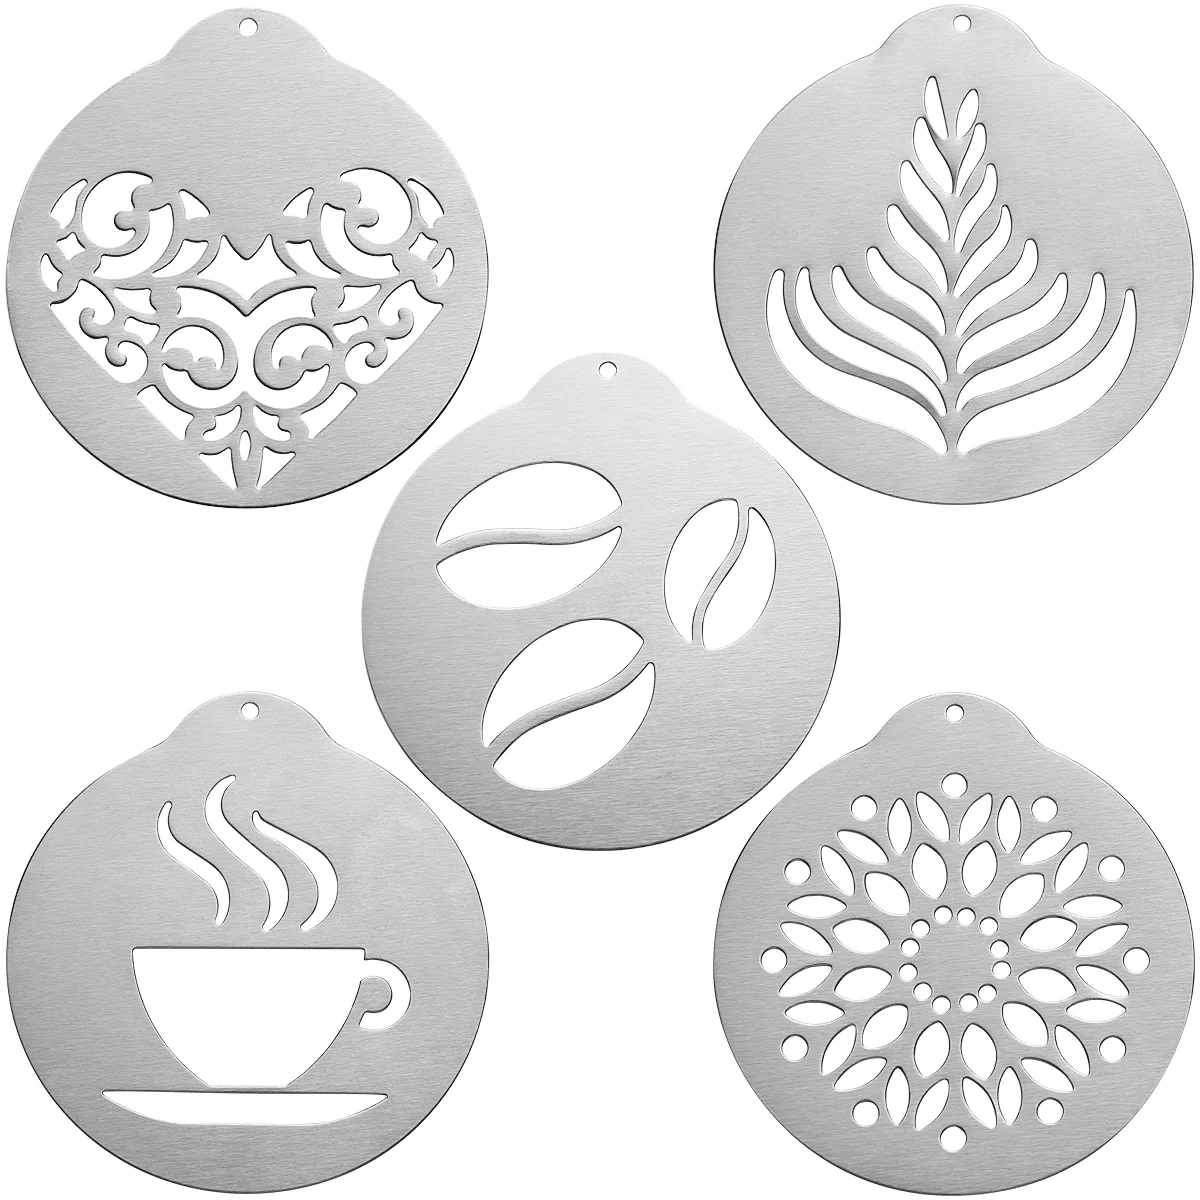 

Coffee Stencils Stainless Steel Printing Barista Cappuccino Garland Mould Cake DIY Decorating Tool for Kitchen and Store, 5PCS